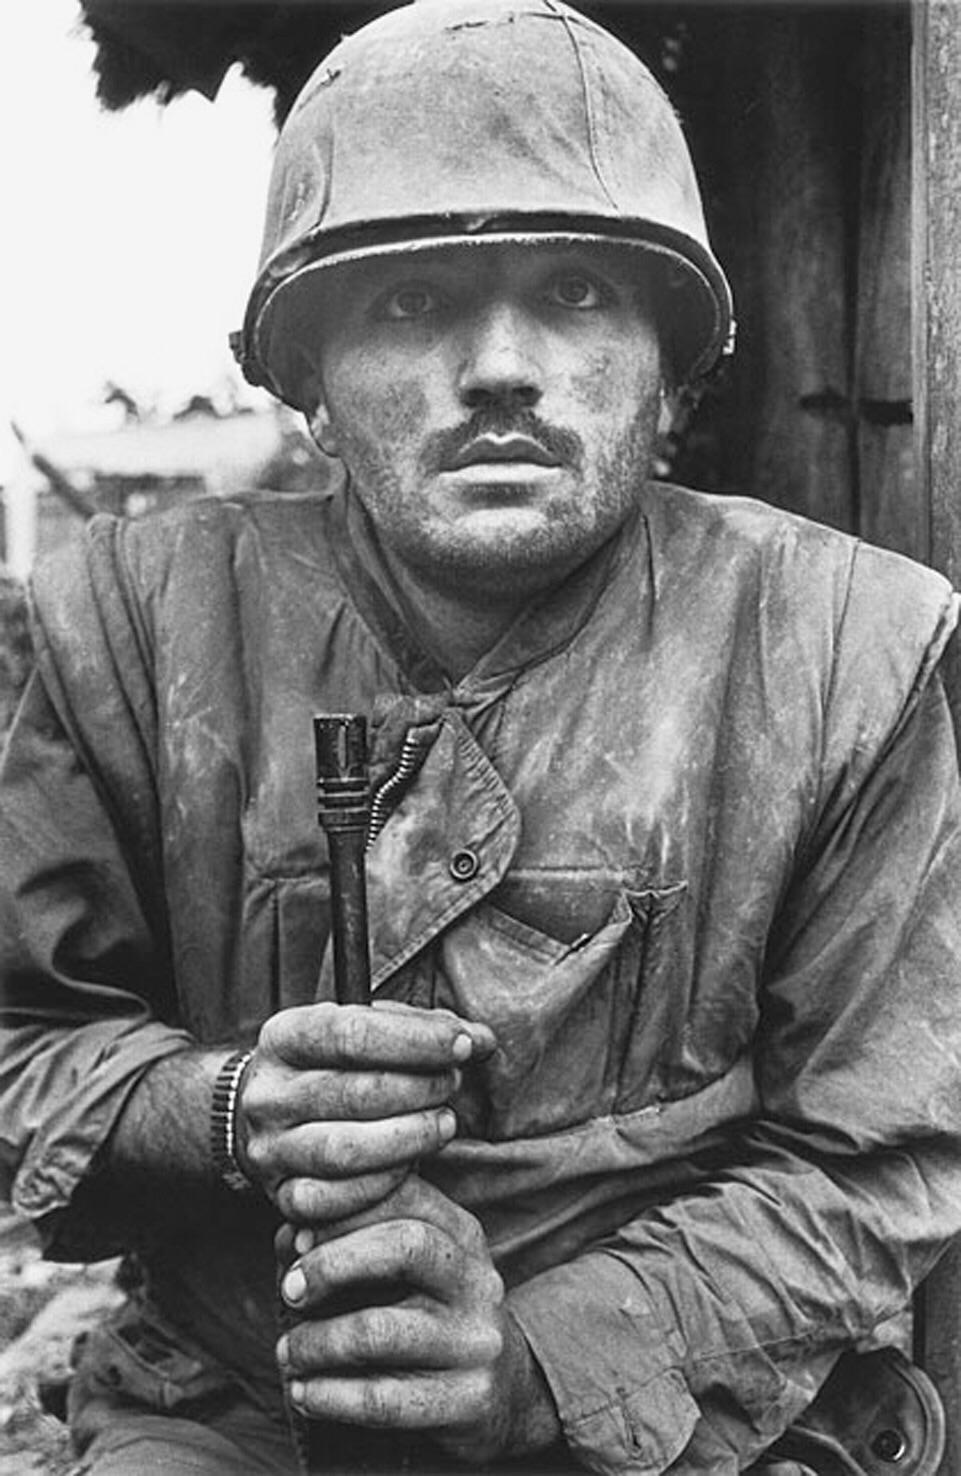 Shell-shocked soldier by Don McCullin, 1968